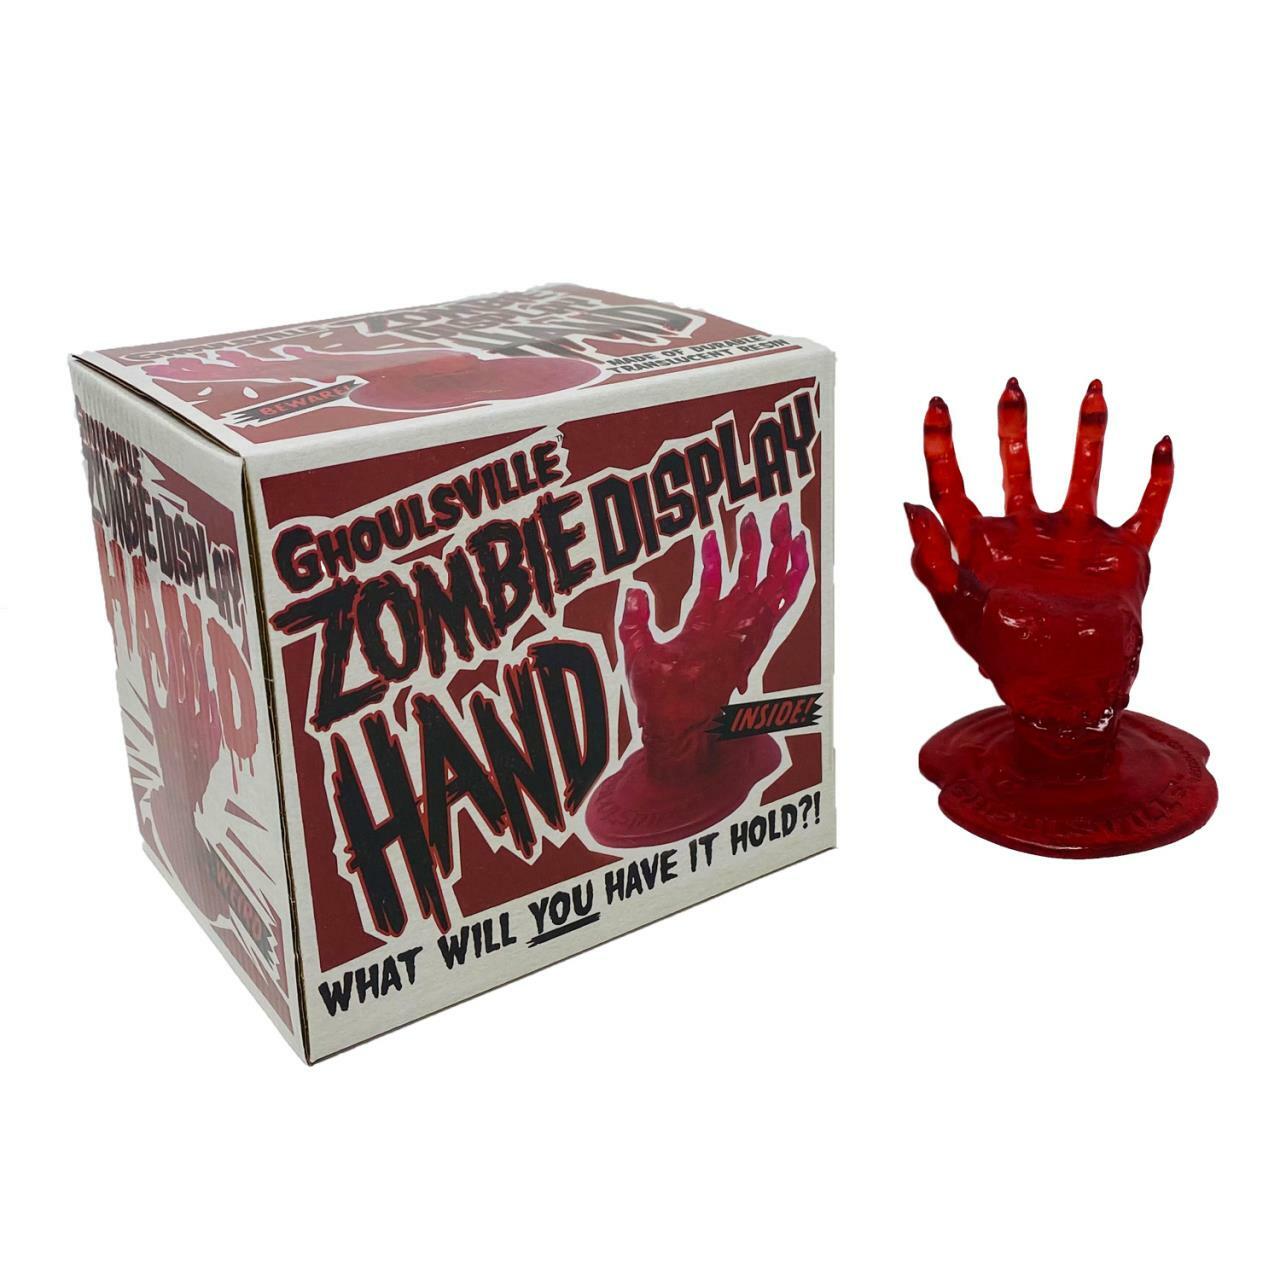 Zombie Display Hand - Blood Red